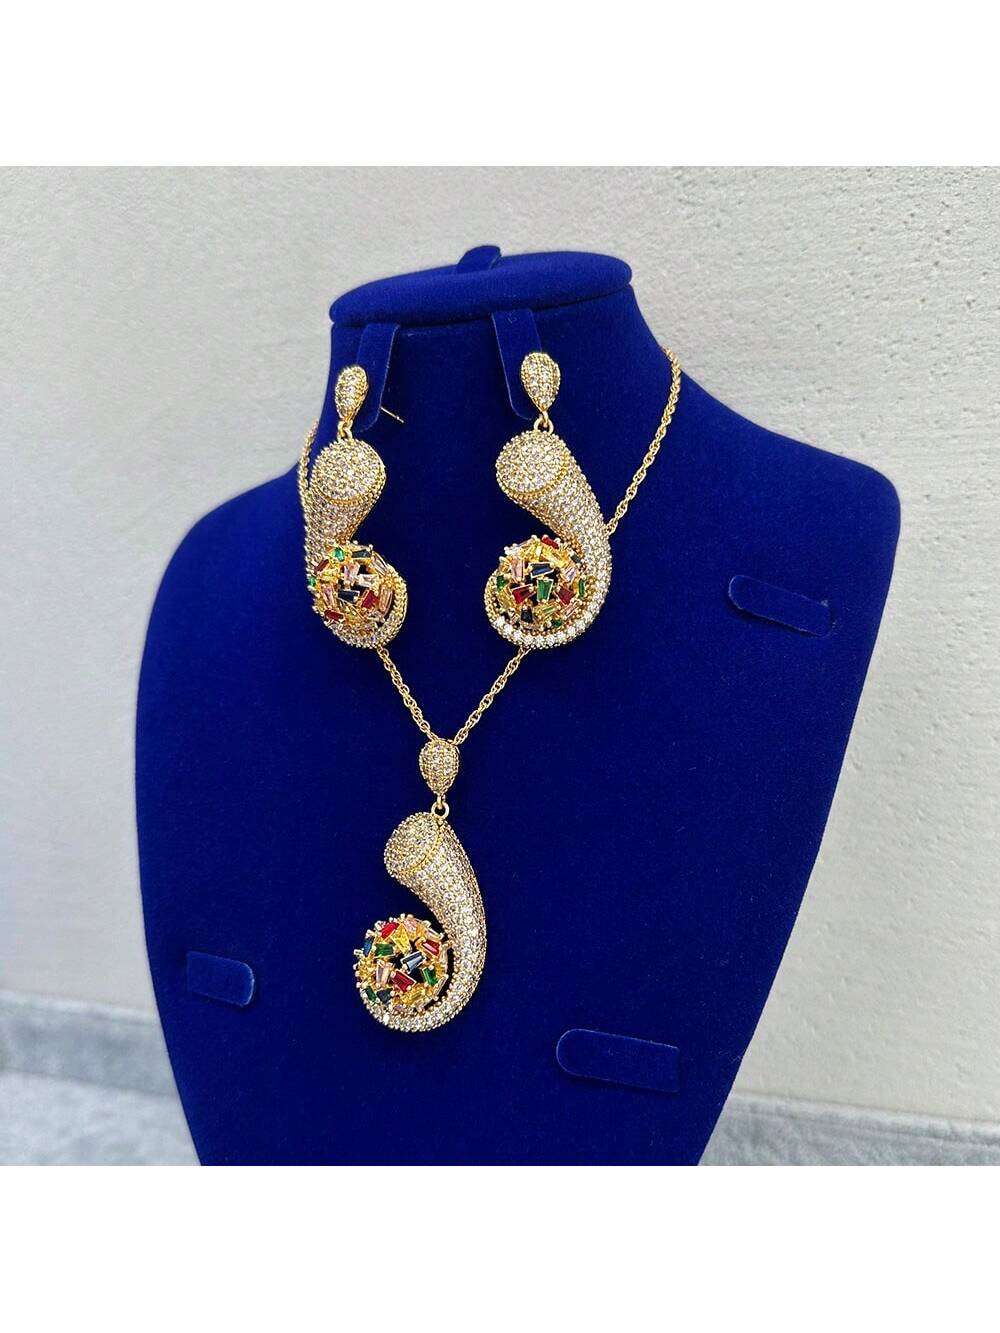 Luxury Evening 2pcs Bridal Jewelry Set With Micro Pave Colorful Cubic Zirconia Necklace And Earrings, For Women'S Daily Wear